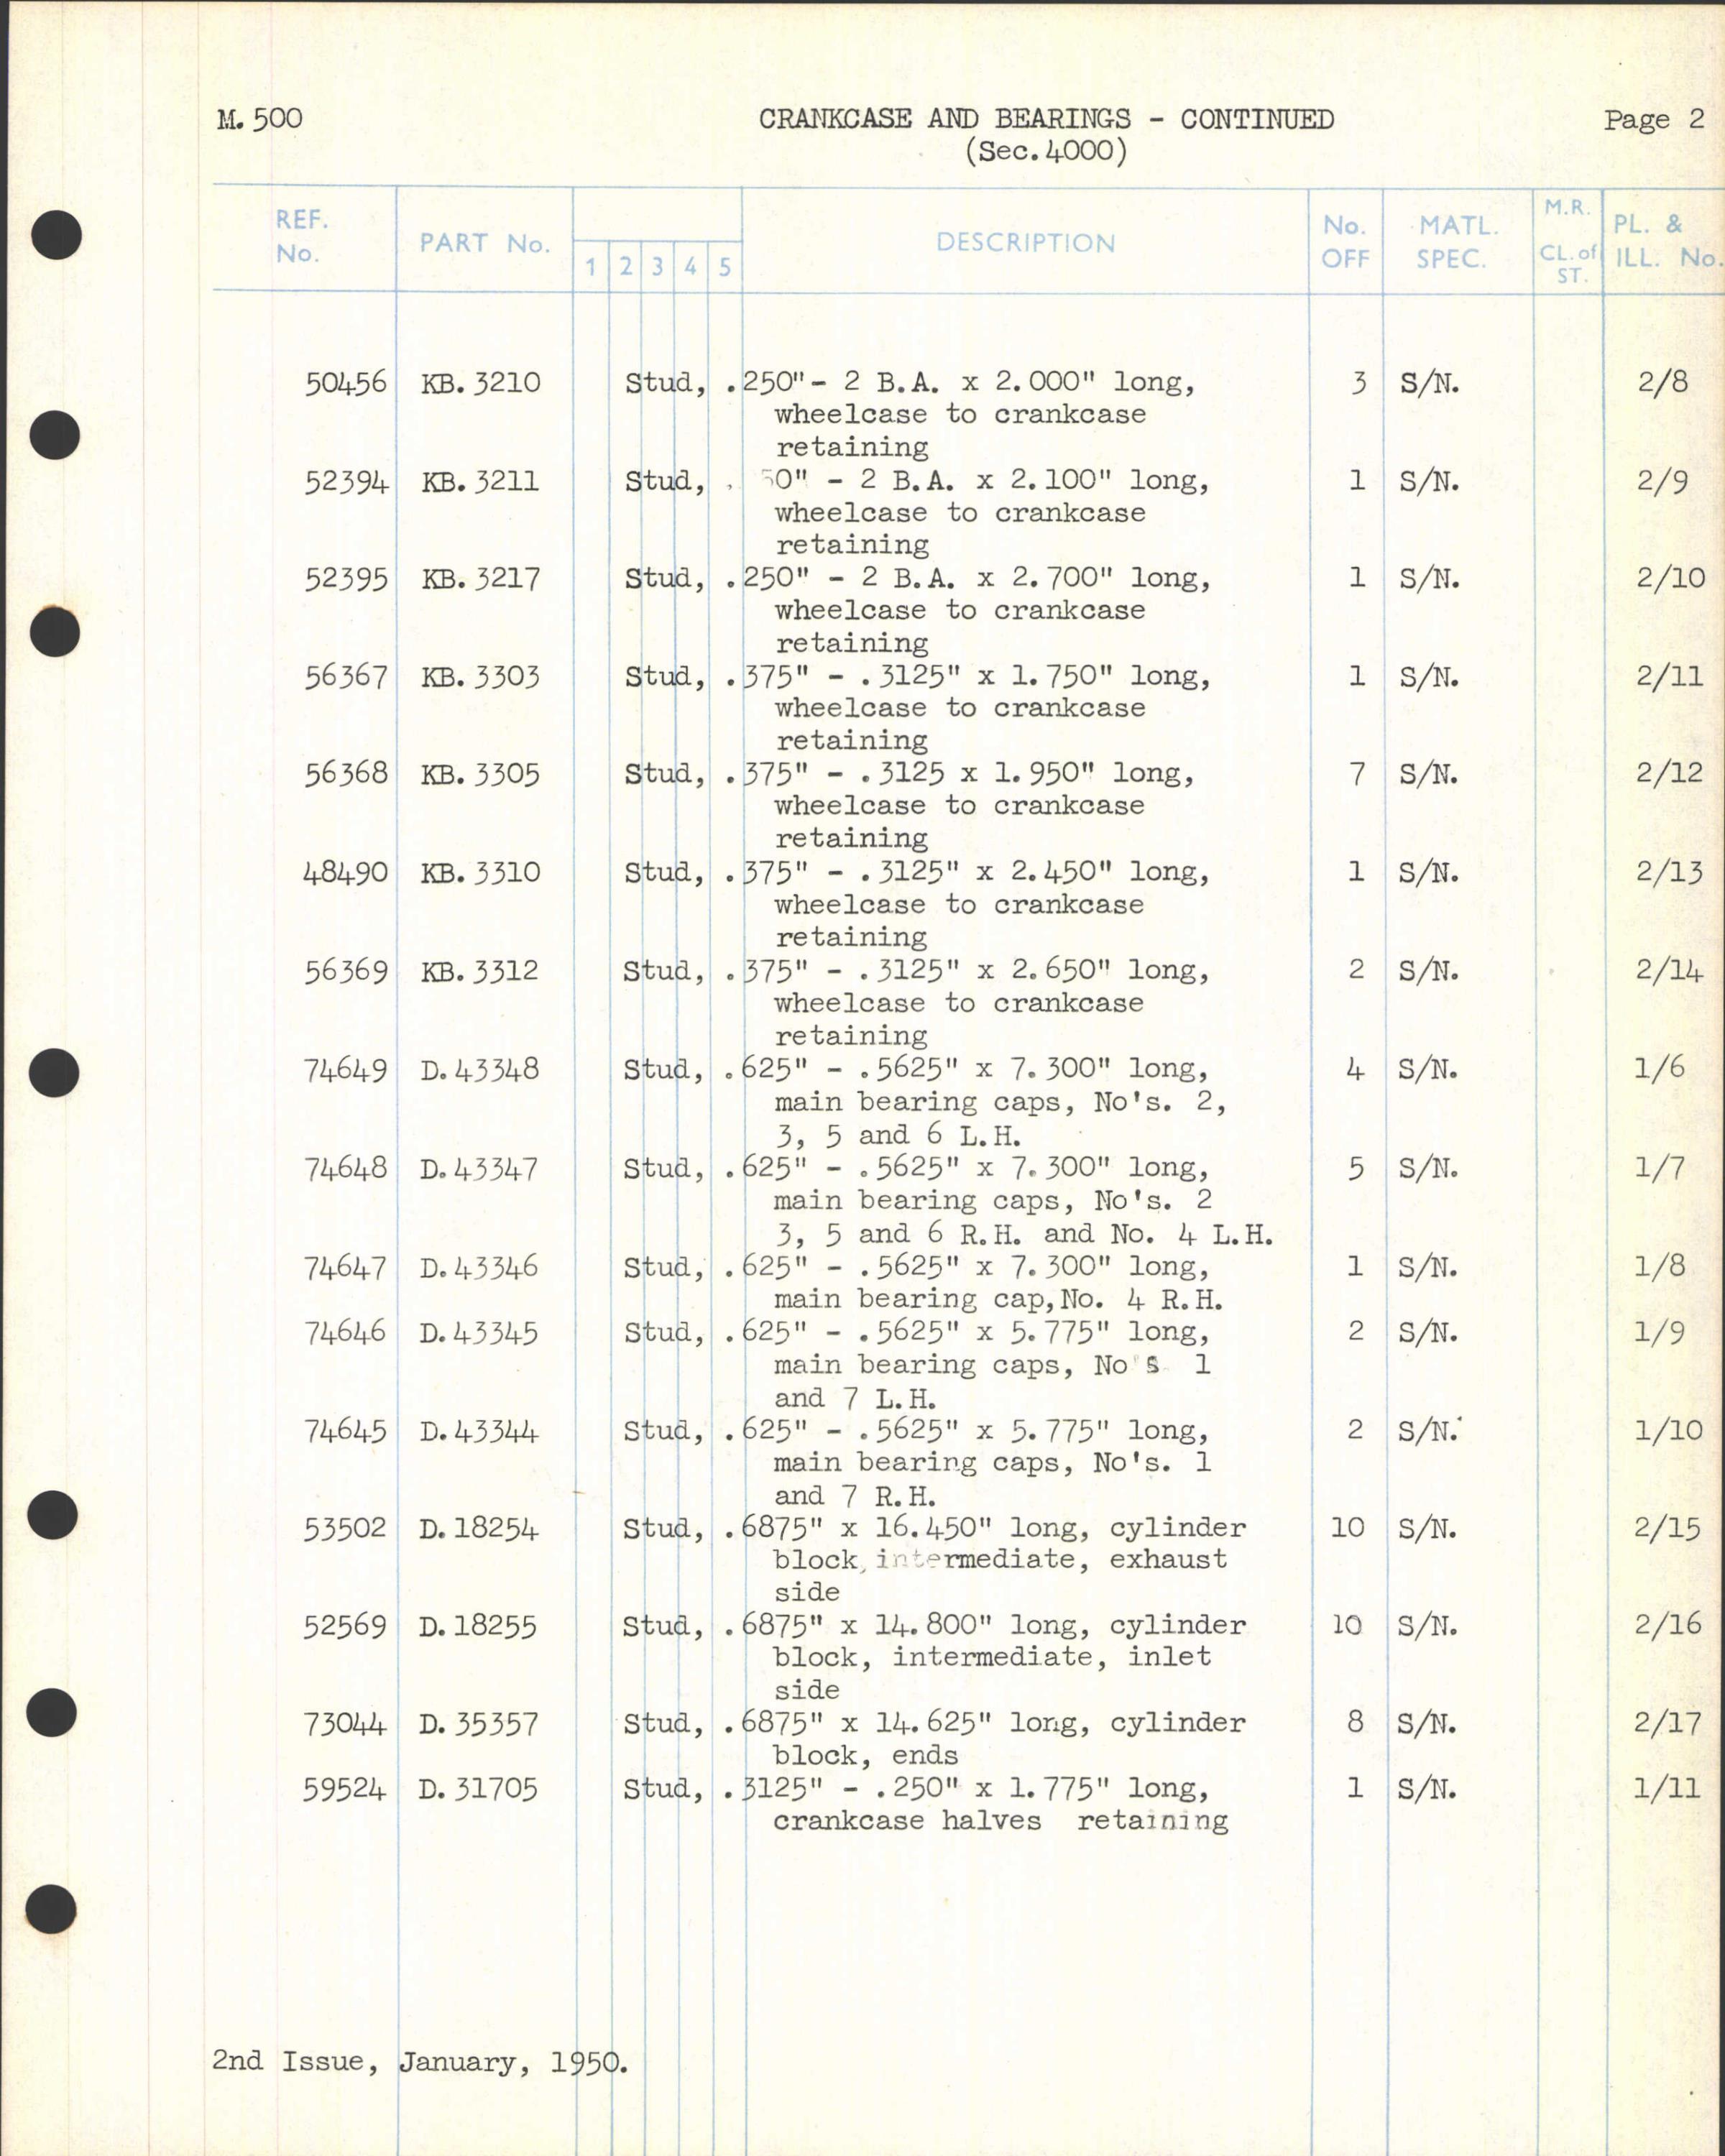 Sample page 51 from AirCorps Library document: Merlin 500 Engine Spare Parts Schedule